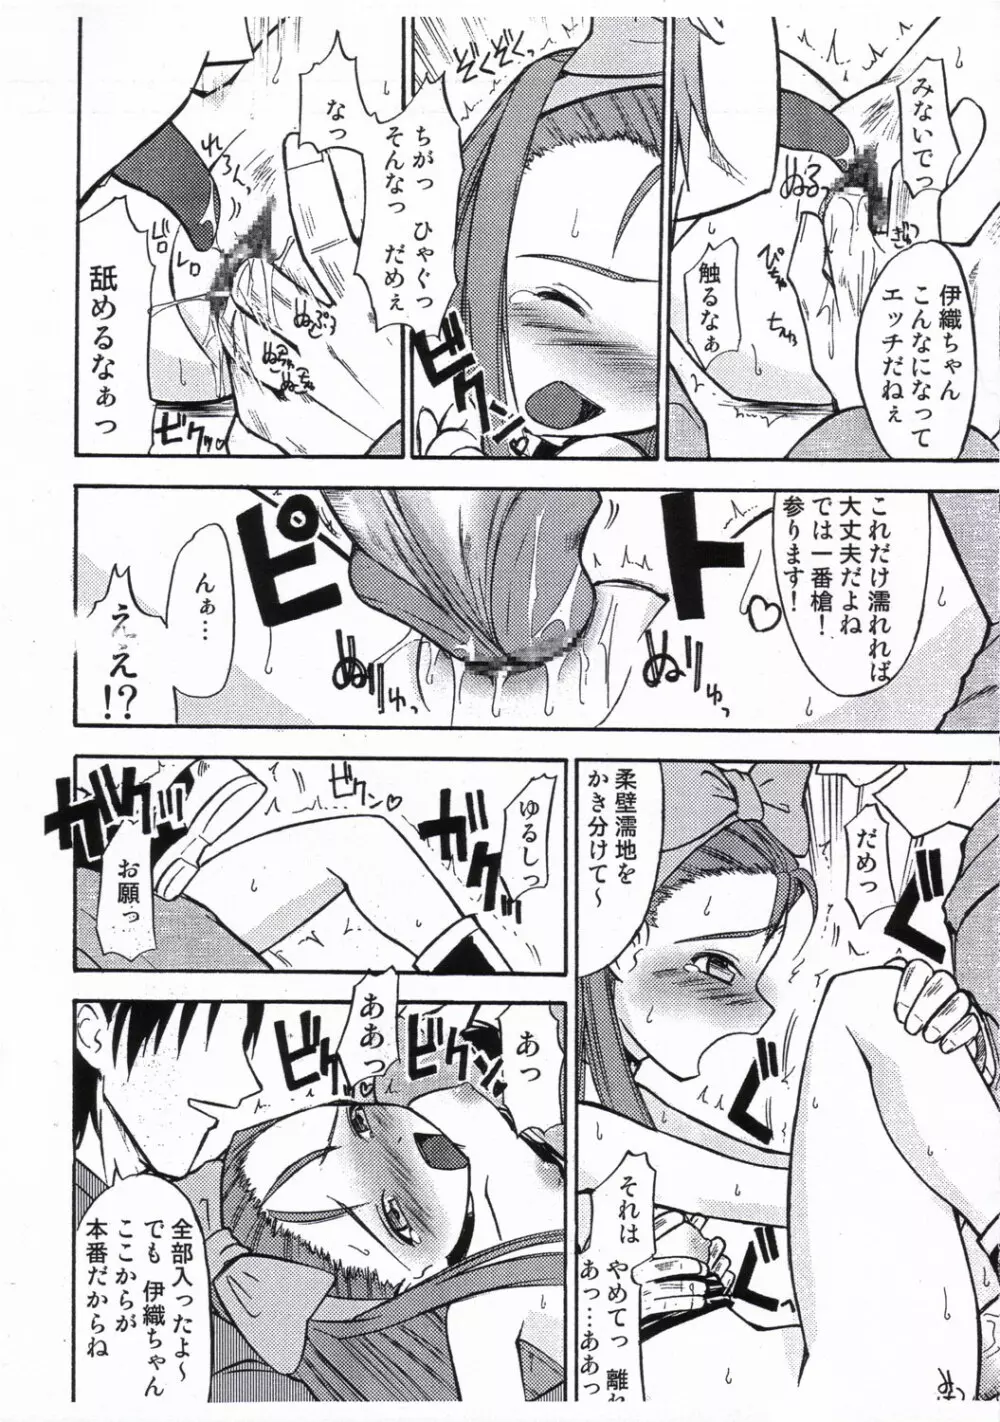 TOUCH MY HE@RT2 vol.2 Page.24